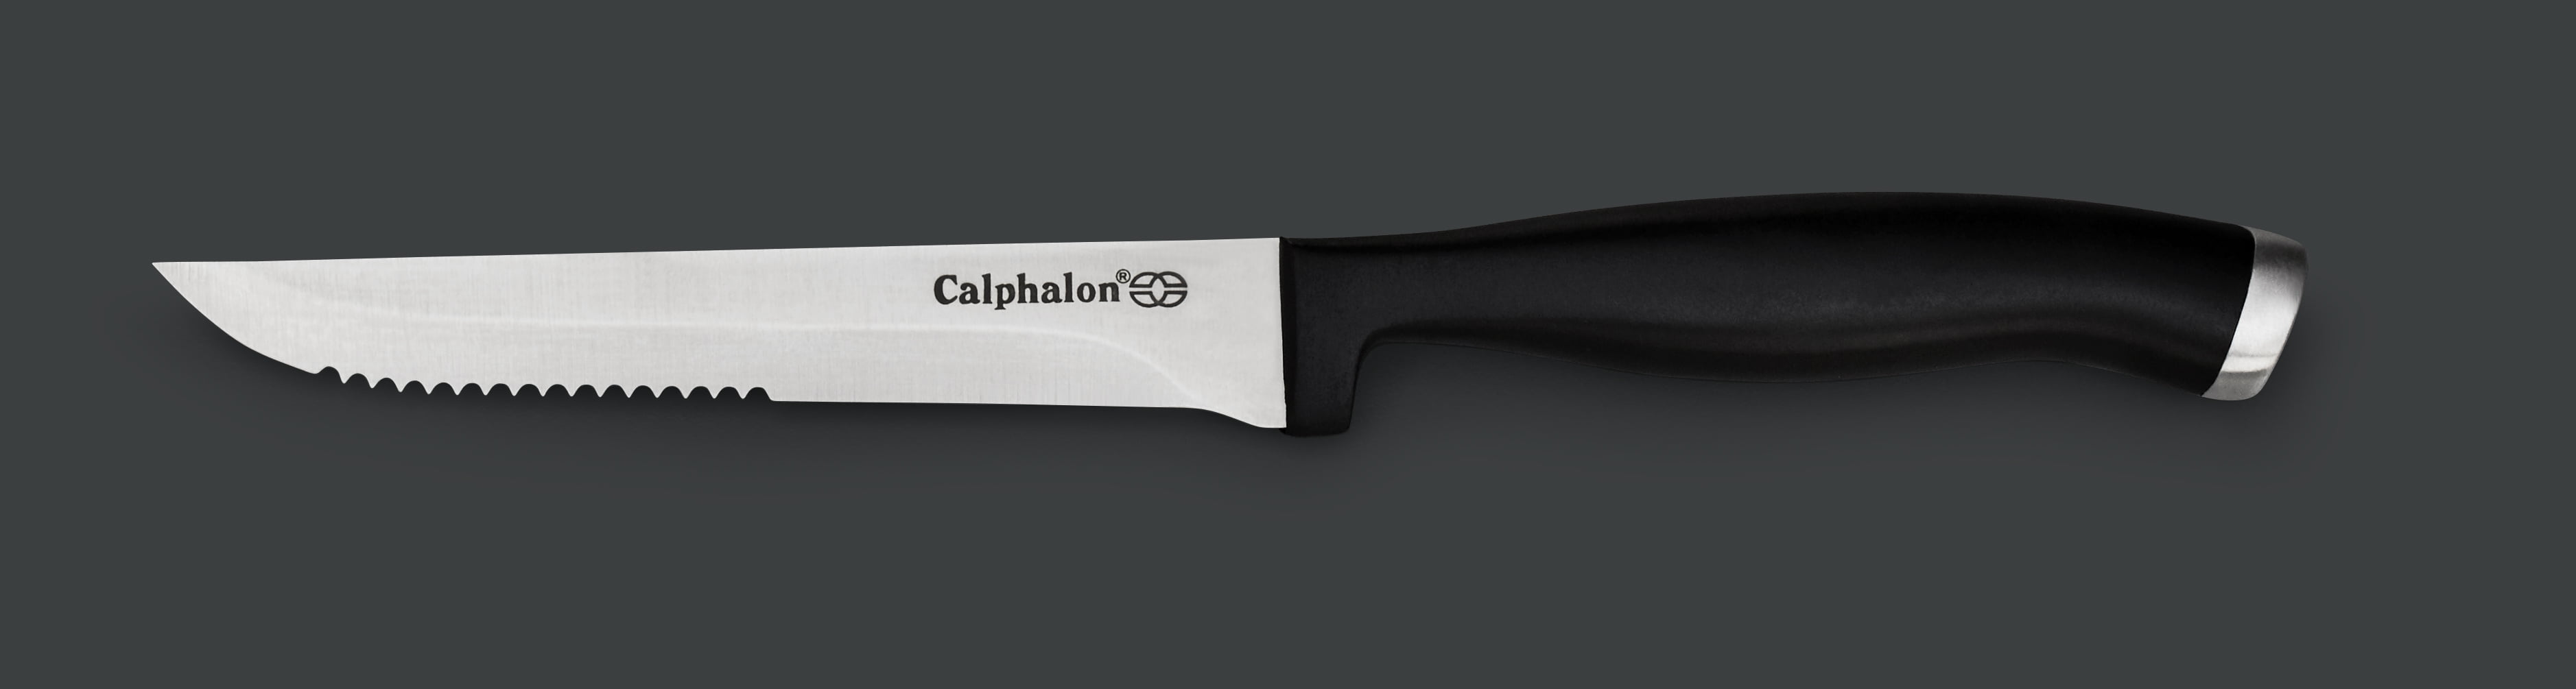 Calphalon Contemporary 8 Inch BREAD KNIFE LOWEST PRICE ON ! (GUC)